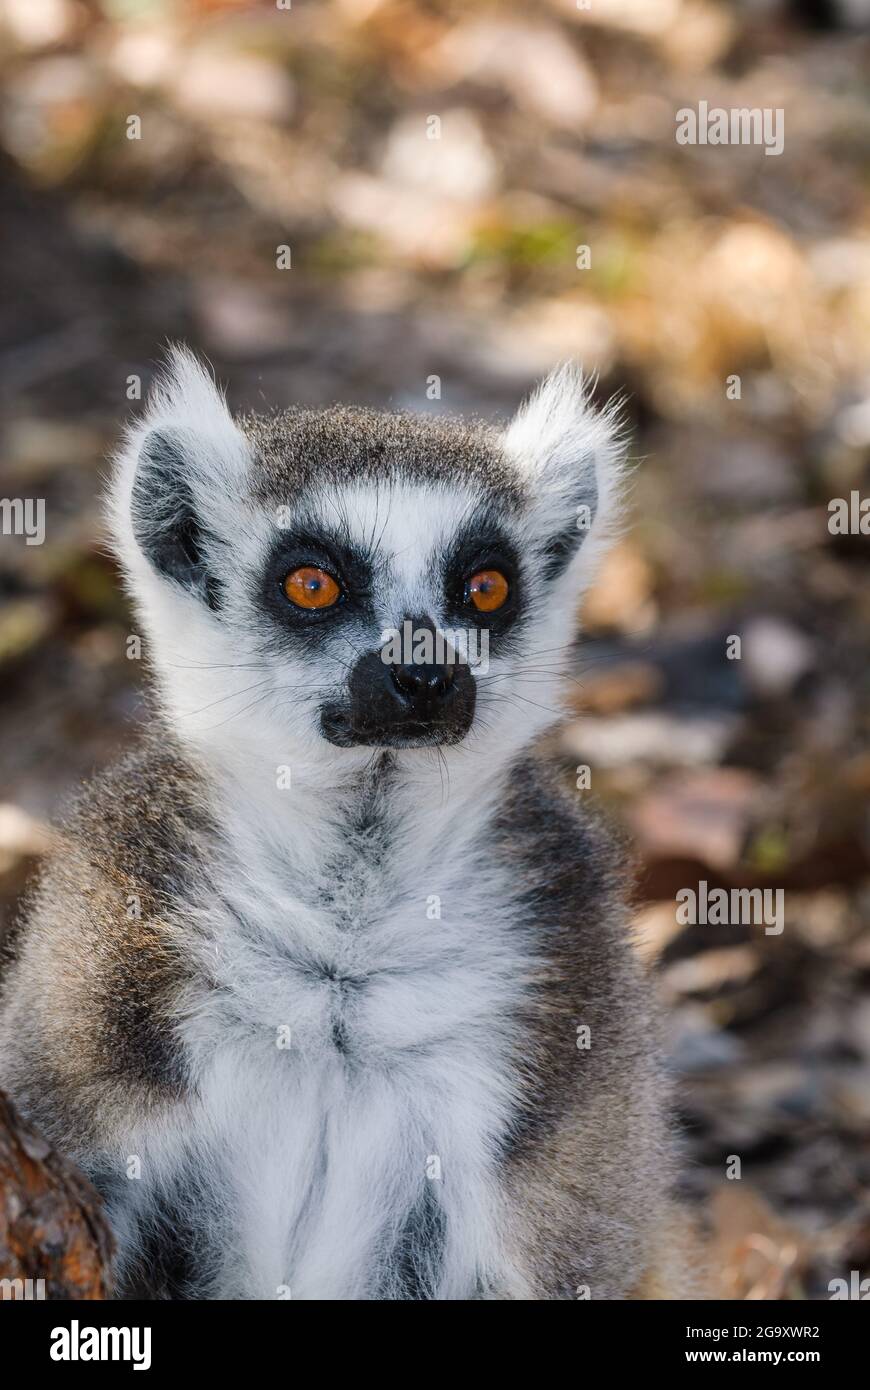 A beautiful single ring-tailed lemur portrait showing a relaxed but wary pose with bright red eyes fixed on the viewer at Koah , Queensland, Australia. Stock Photo